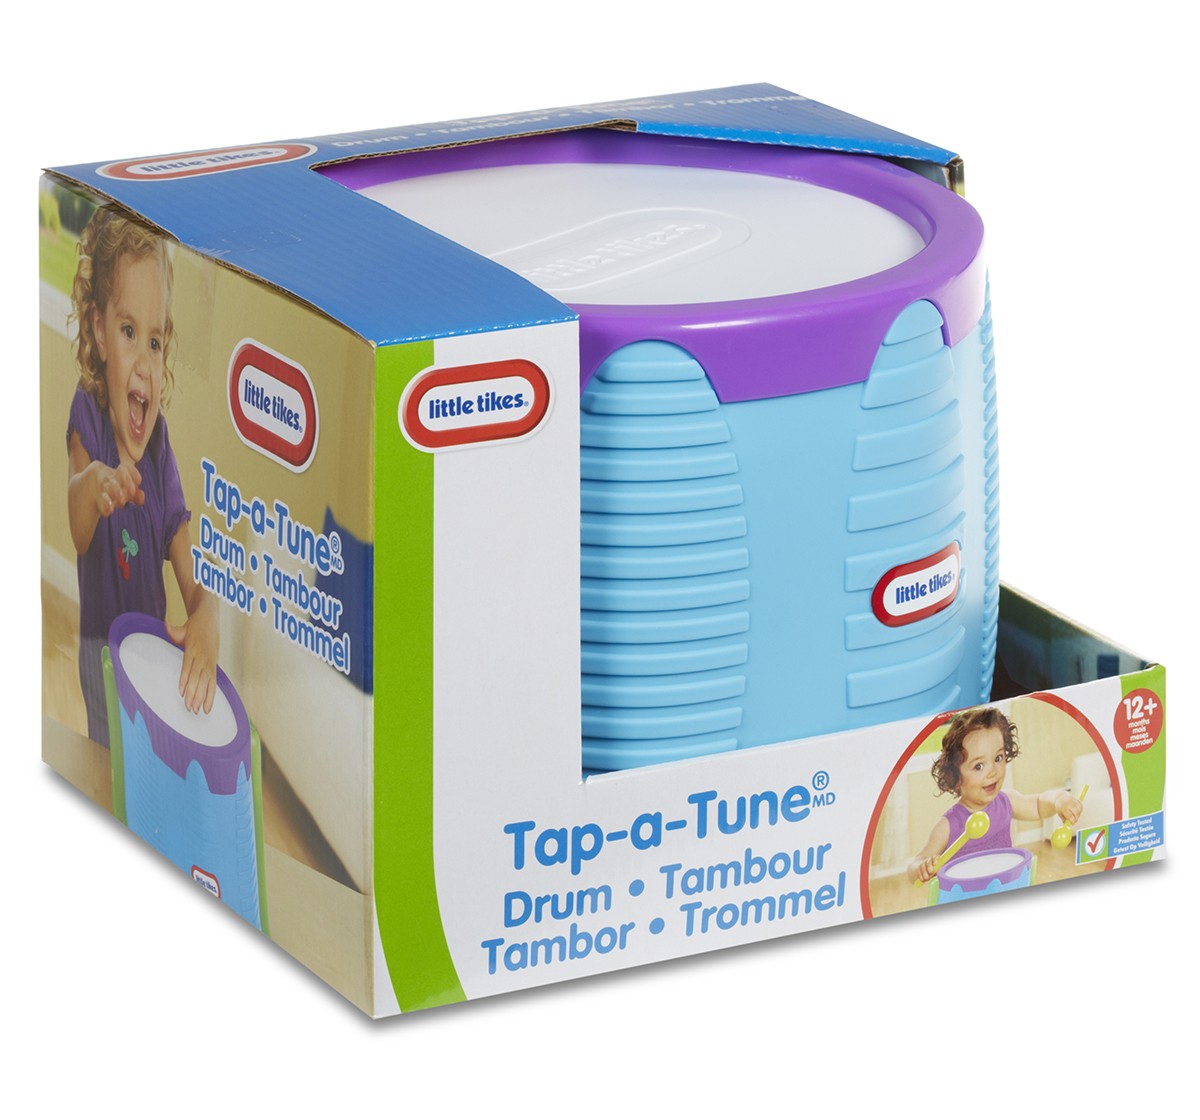 Little Tikes Tap-a-Tune Drum Musical Toys for Kids age 12M+ 